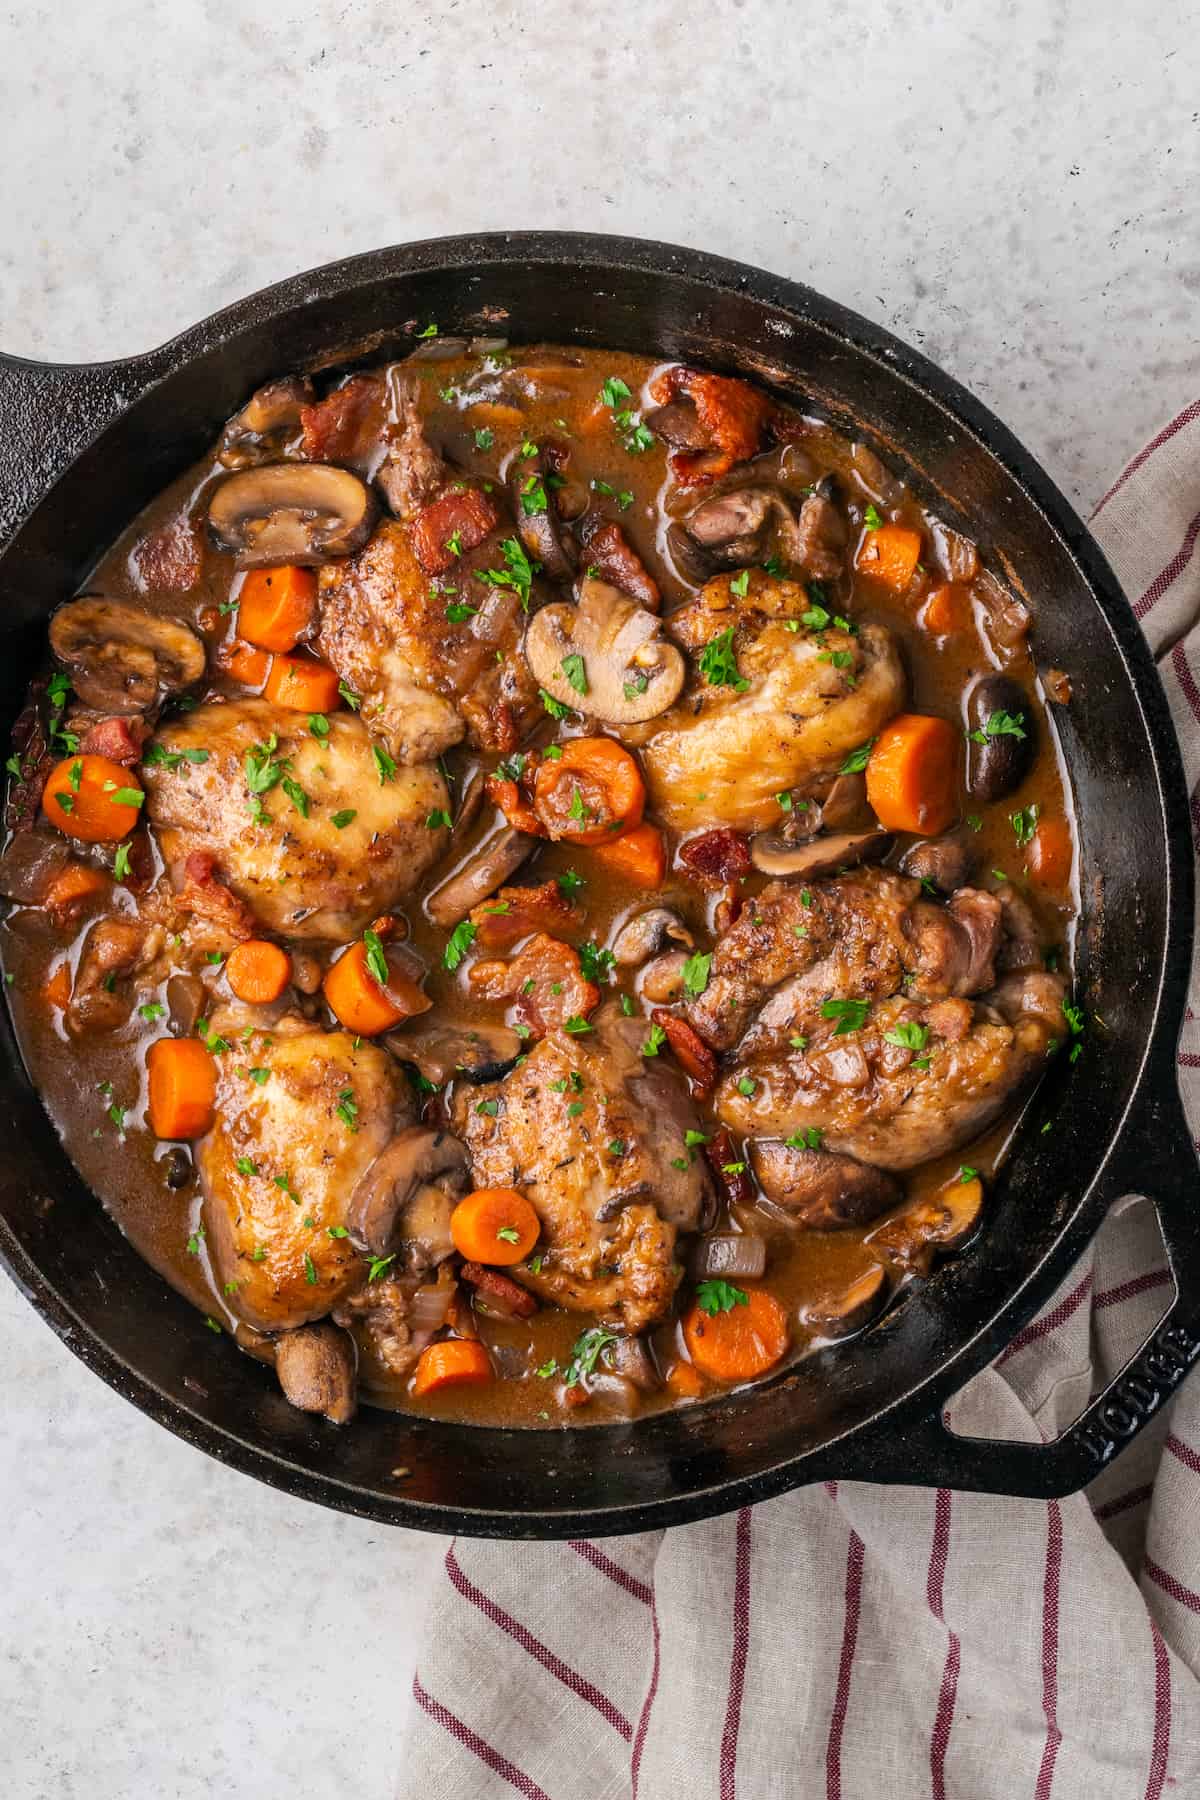 A cast iron skillet with a finished coq au vin dish sprinkled with parsley.